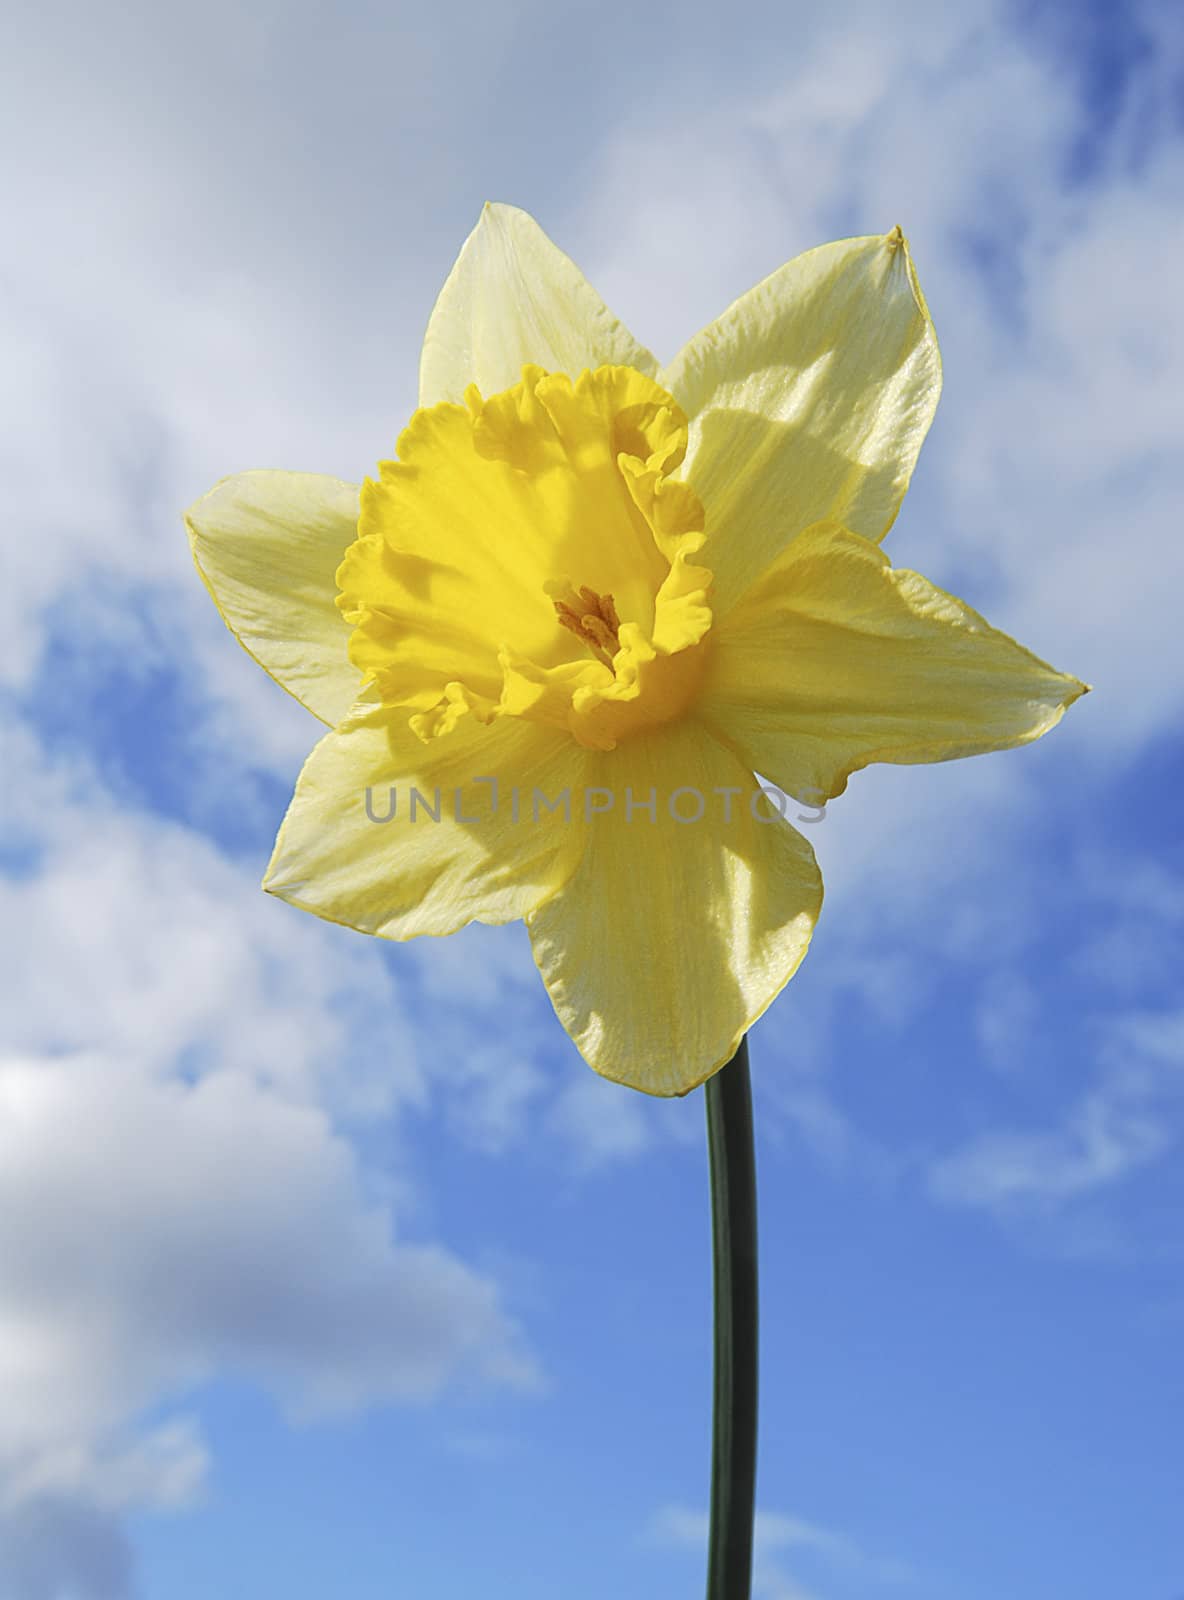 Closeup of yellow daffodil flower against blue cloudy sky.